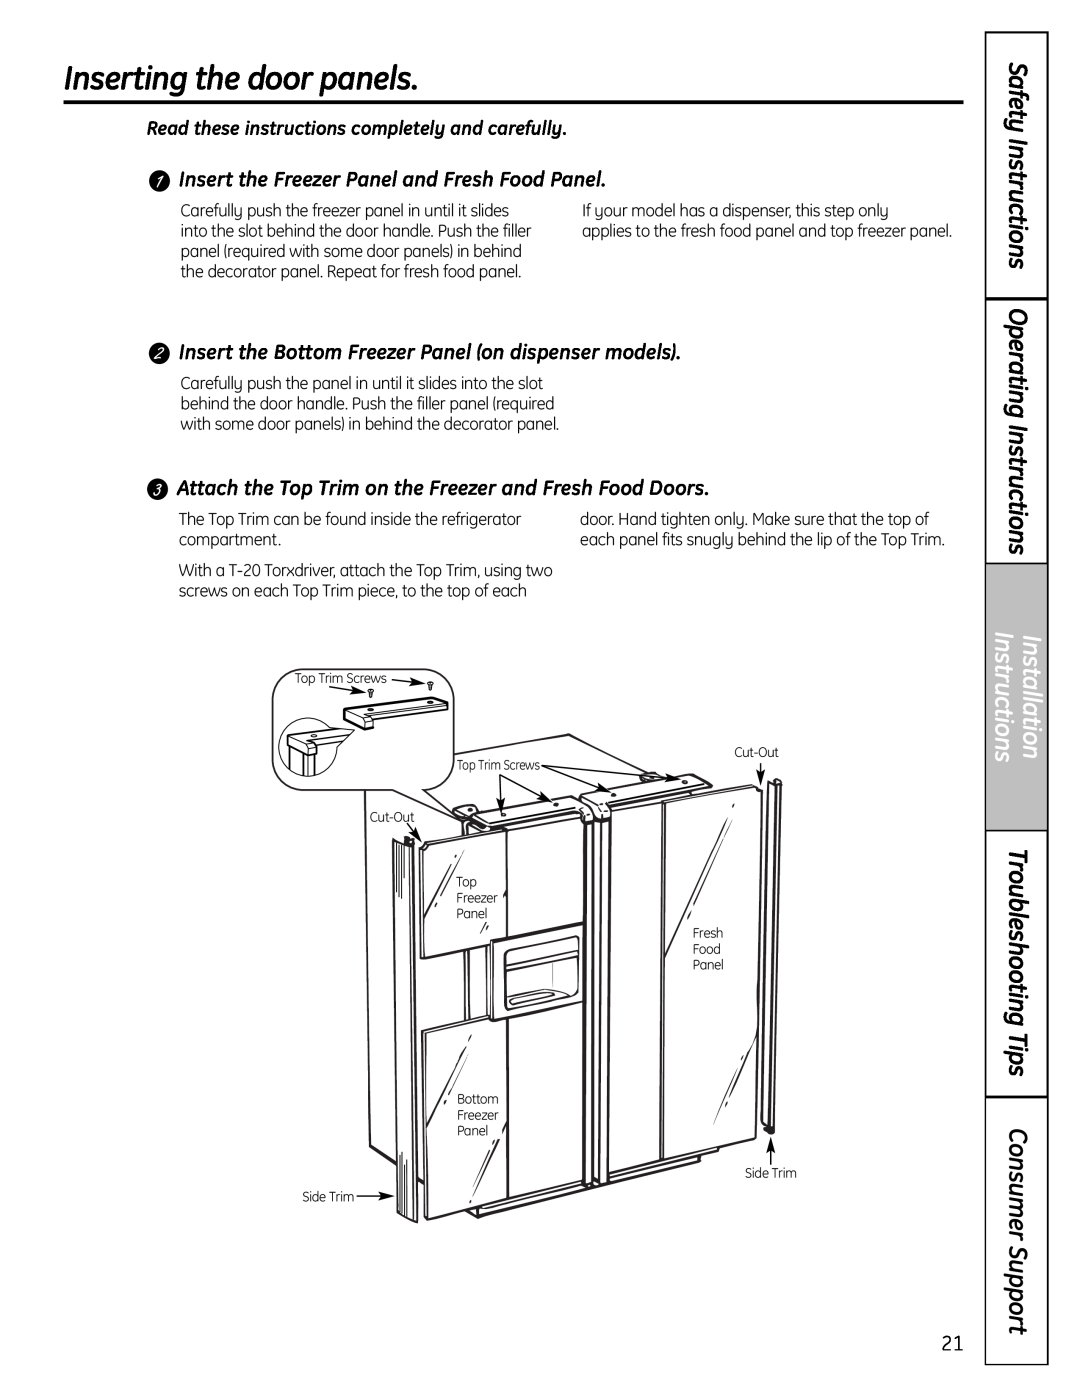 GE 25, 26 Inserting the door panels, Insert the Freezer Panel and Fresh Food Panel, Troubleshooting Tips Consumer Support 